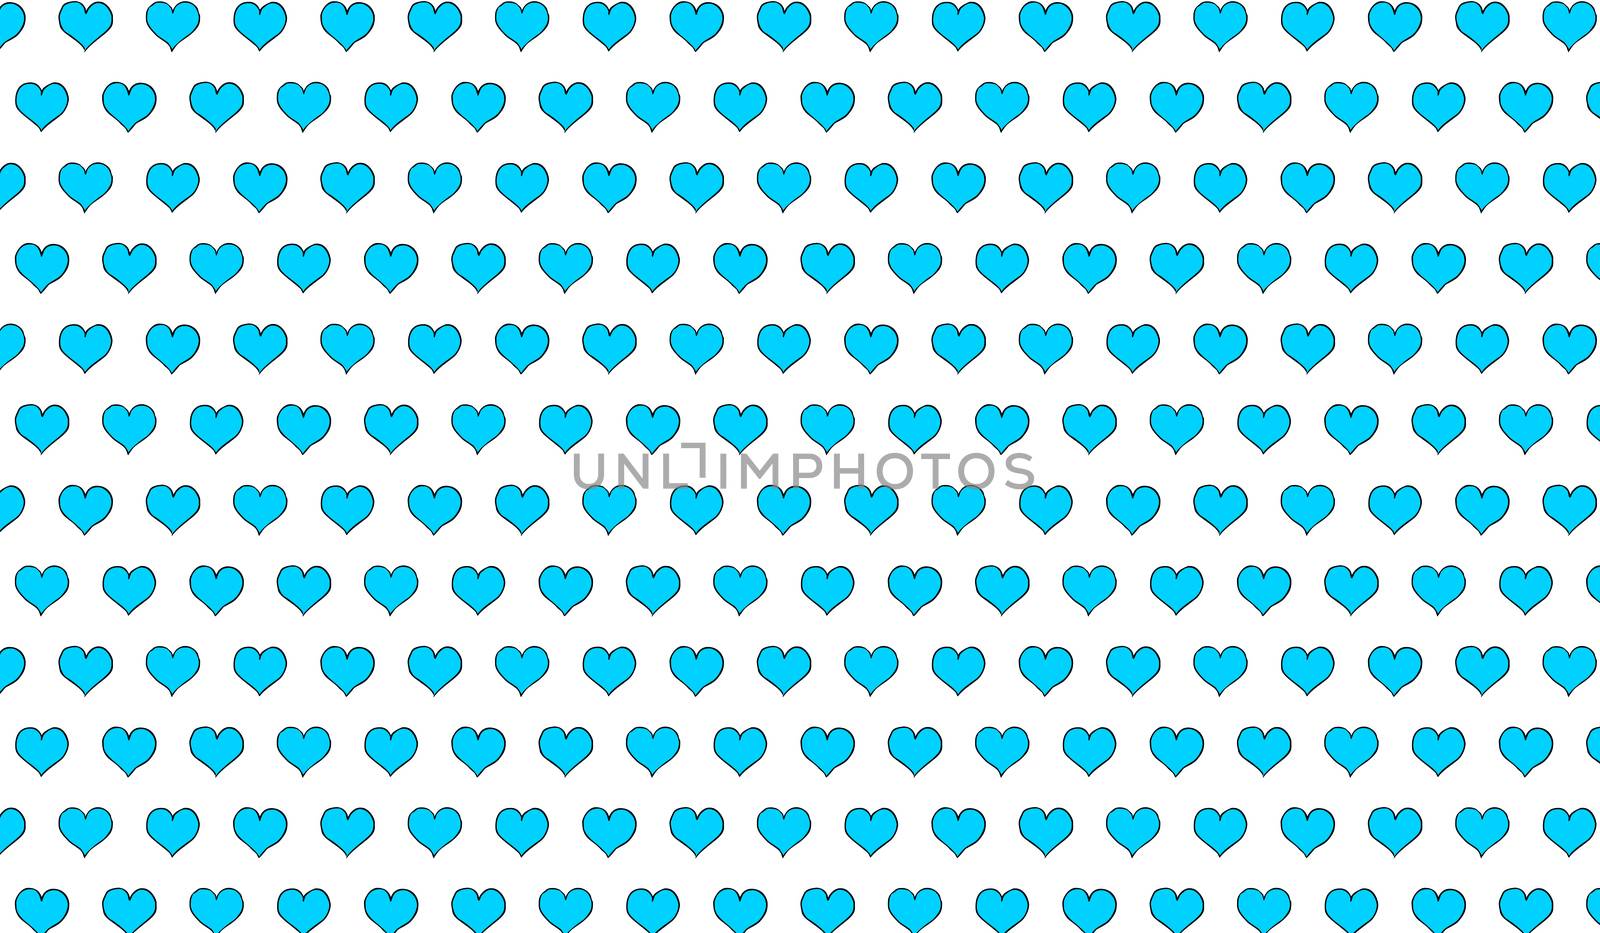 2d azure pattern of cartoon hearts on isolated background.